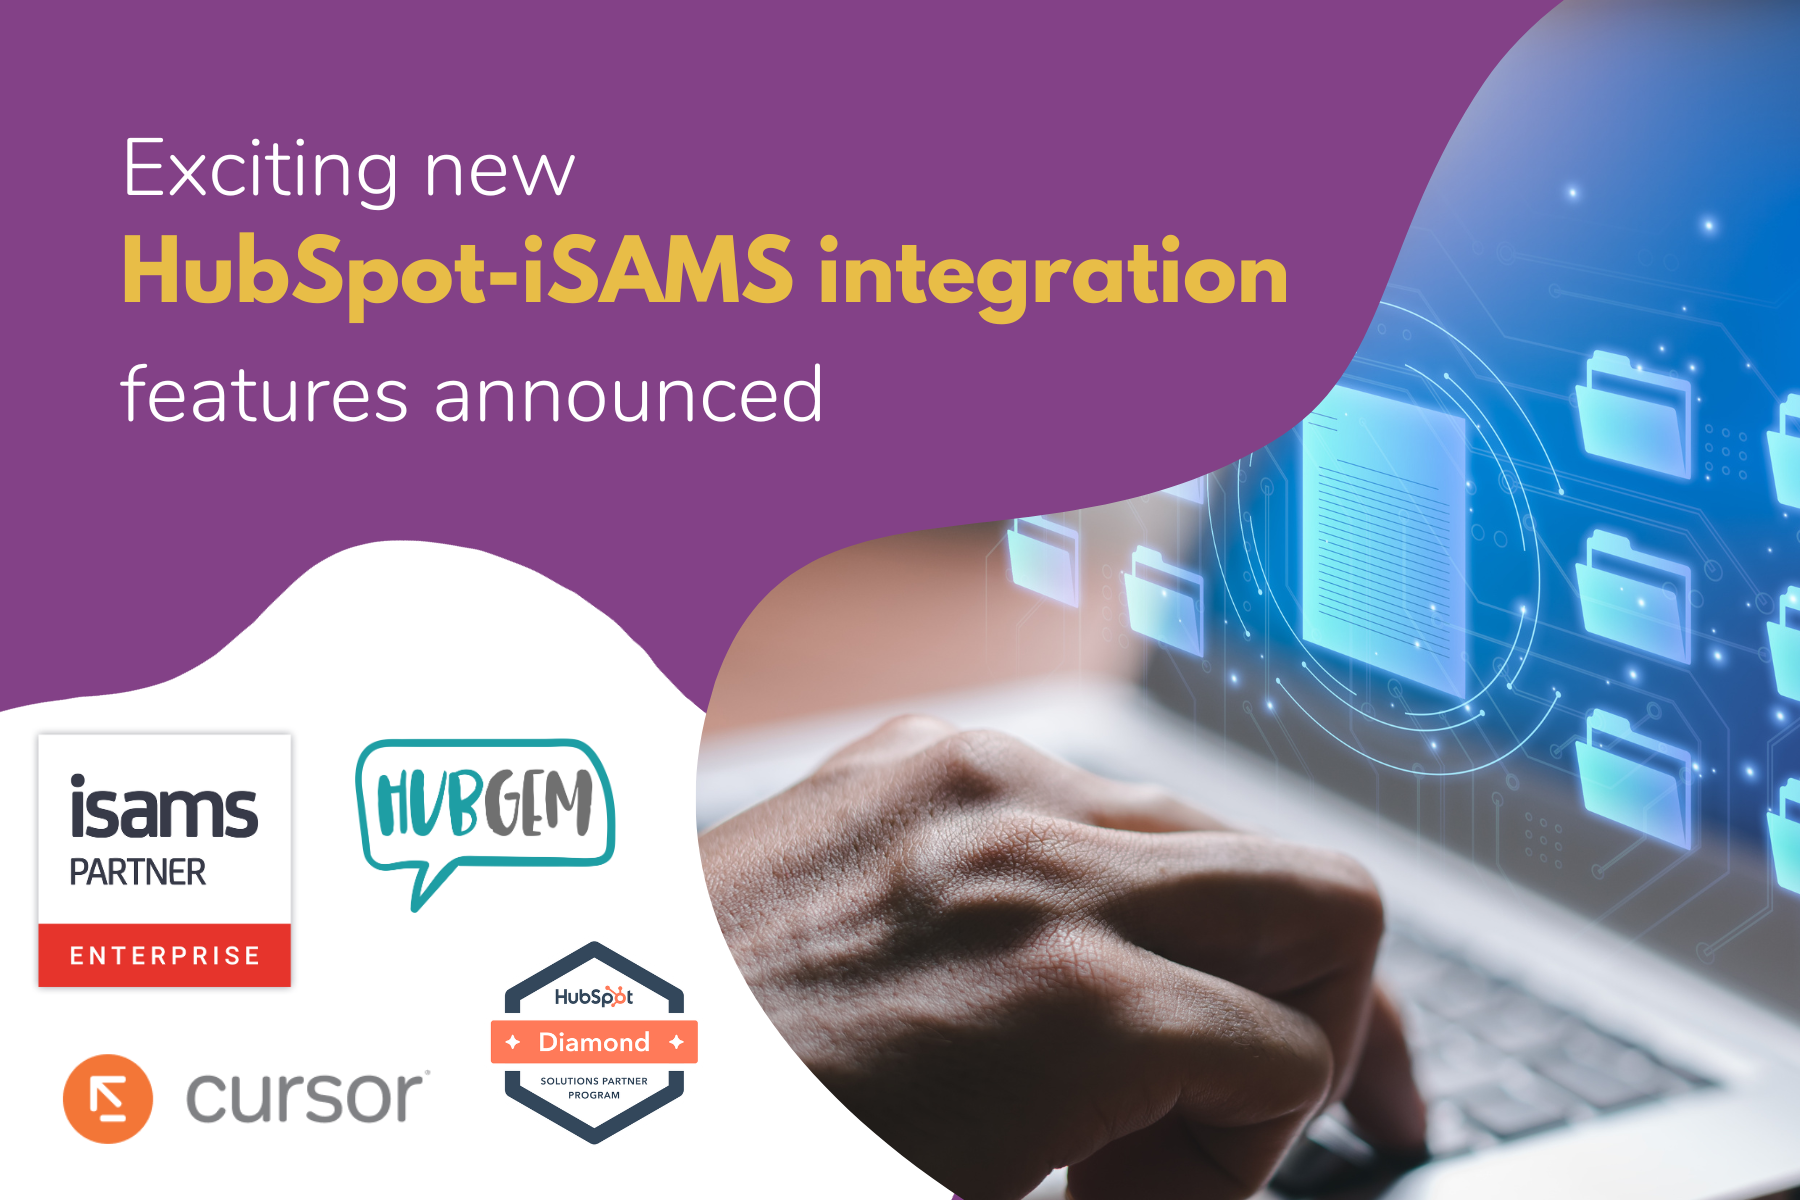 Exciting new features: HubSpot-iSAMS integration